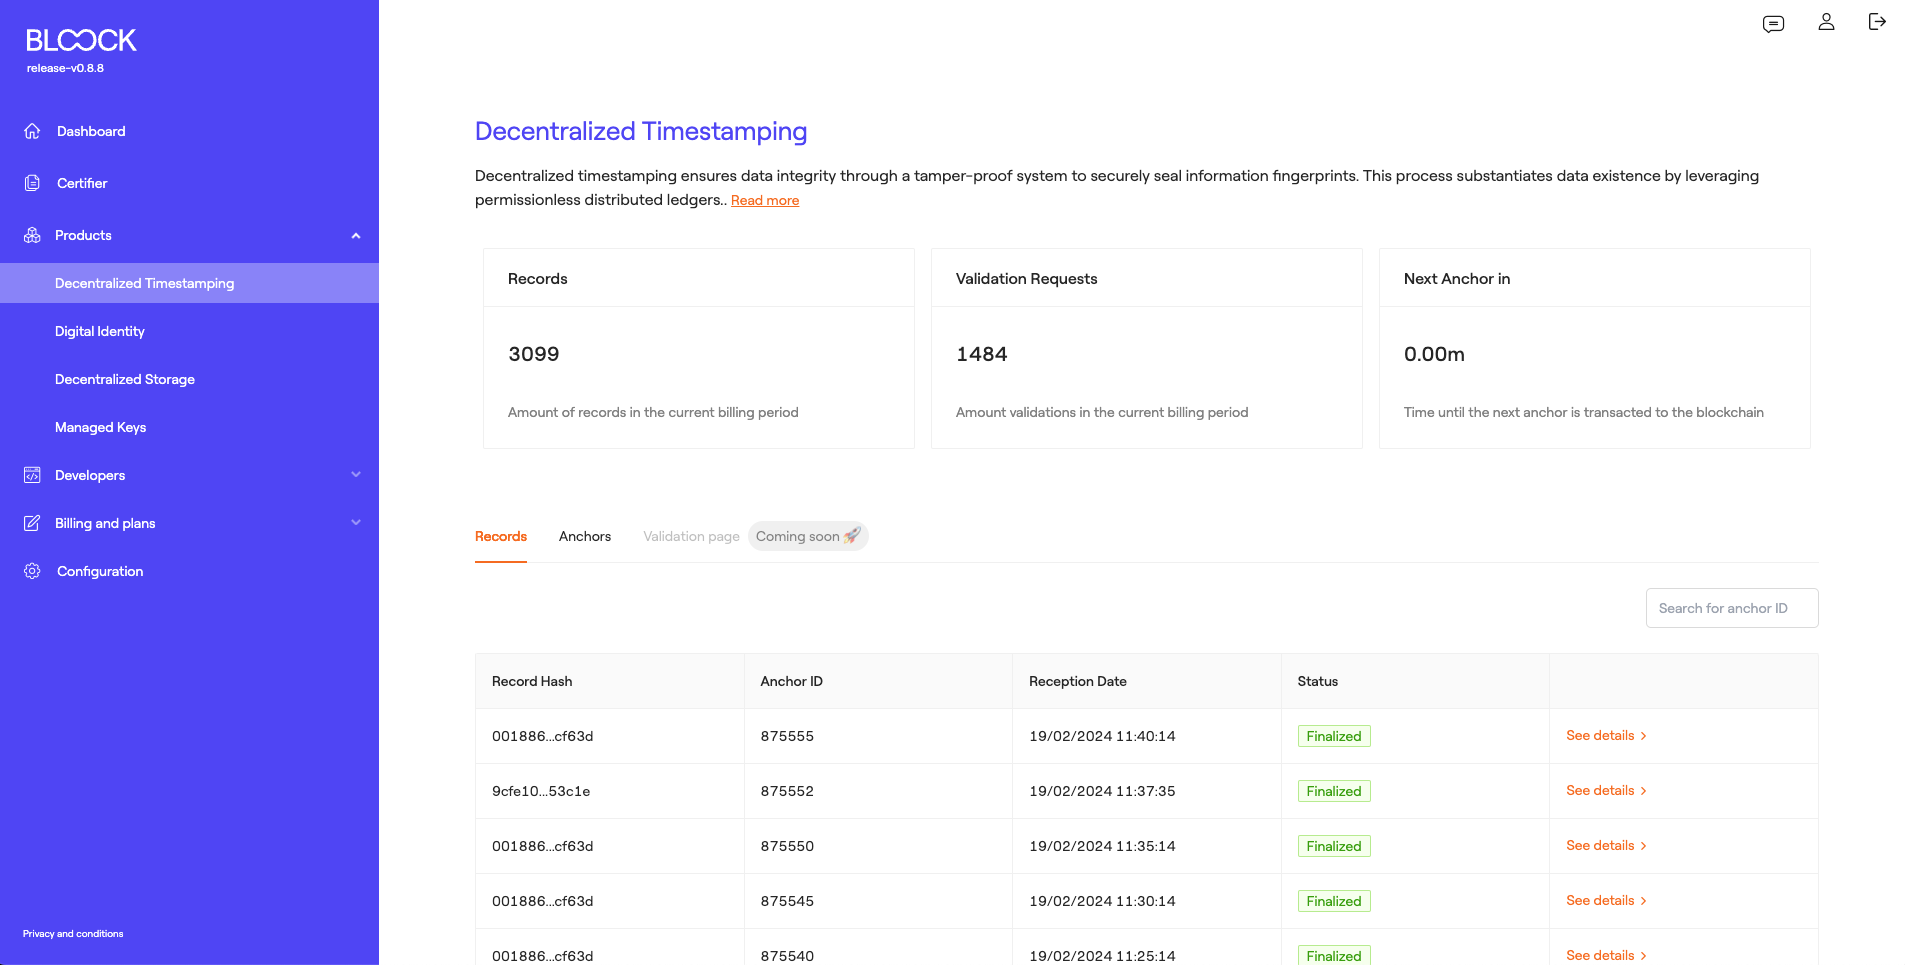 Decentralized Timestamping Overview